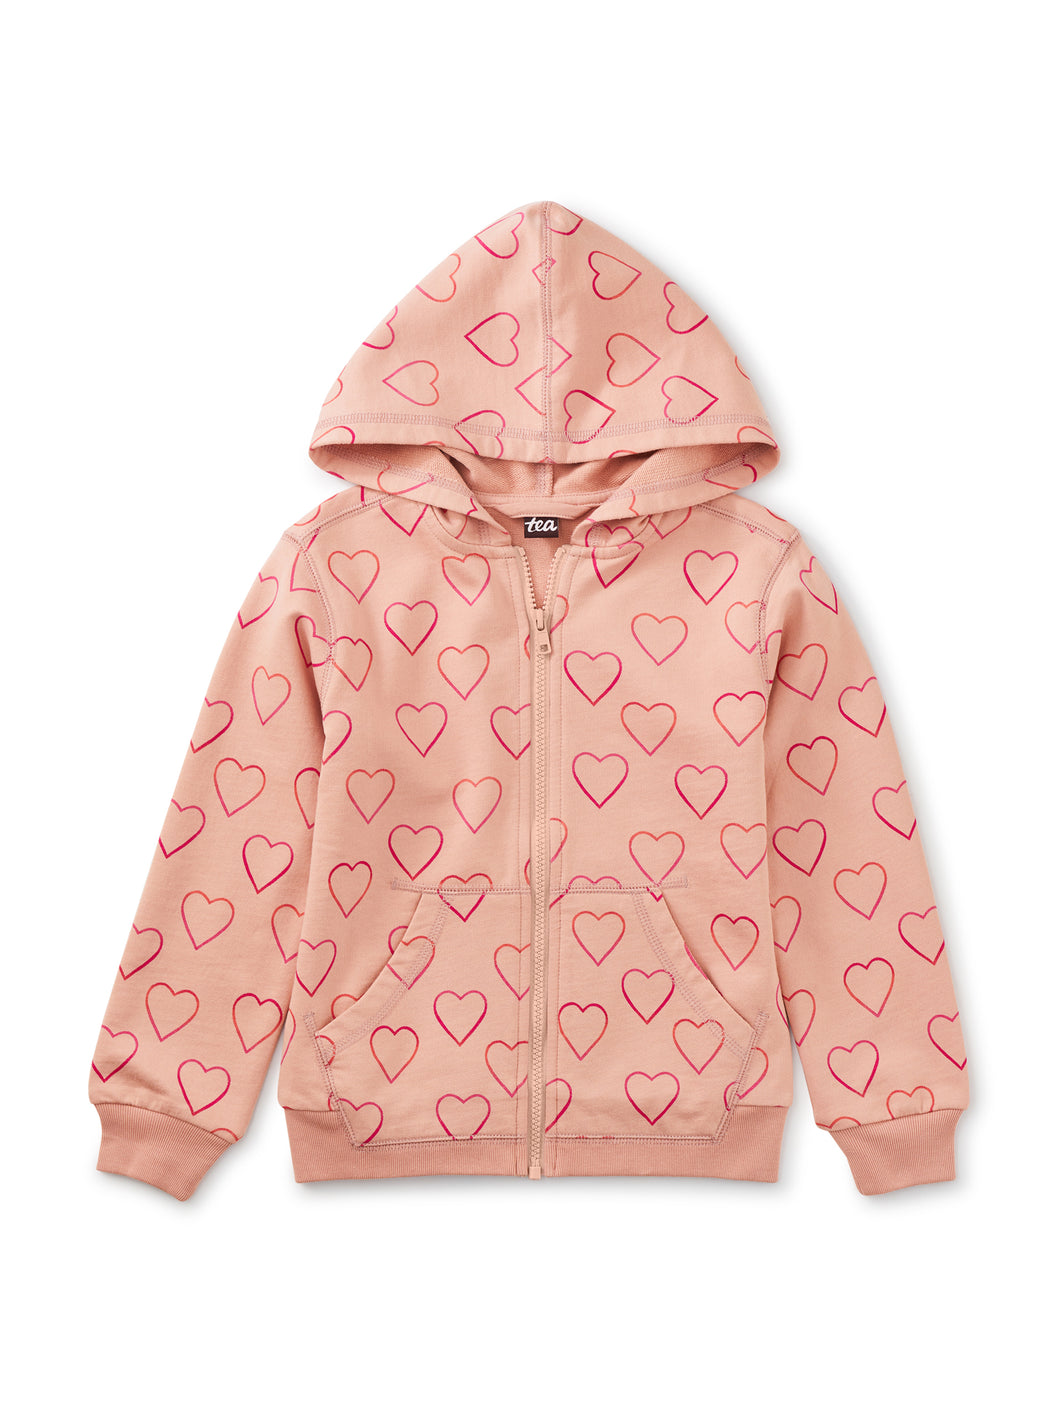 Tea Collection Going Places Hoodie- Ombre Hearts